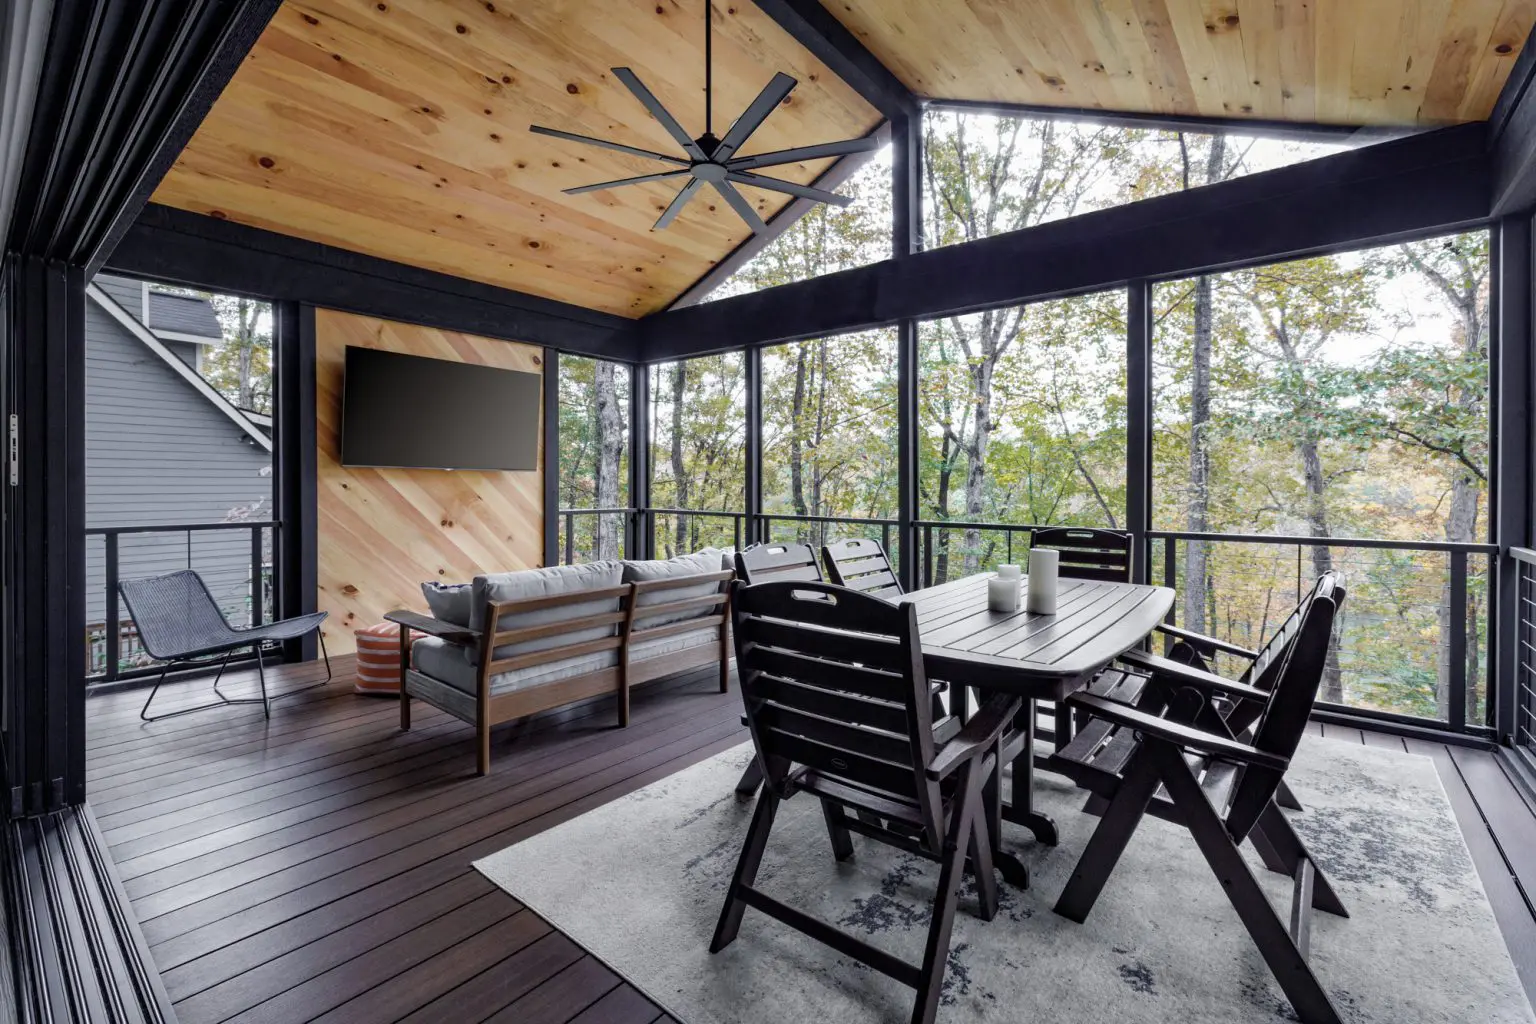 Screened porch with wooden ceiling and contemporary furniture set, designed for outdoor living by Michael James Remodeling.